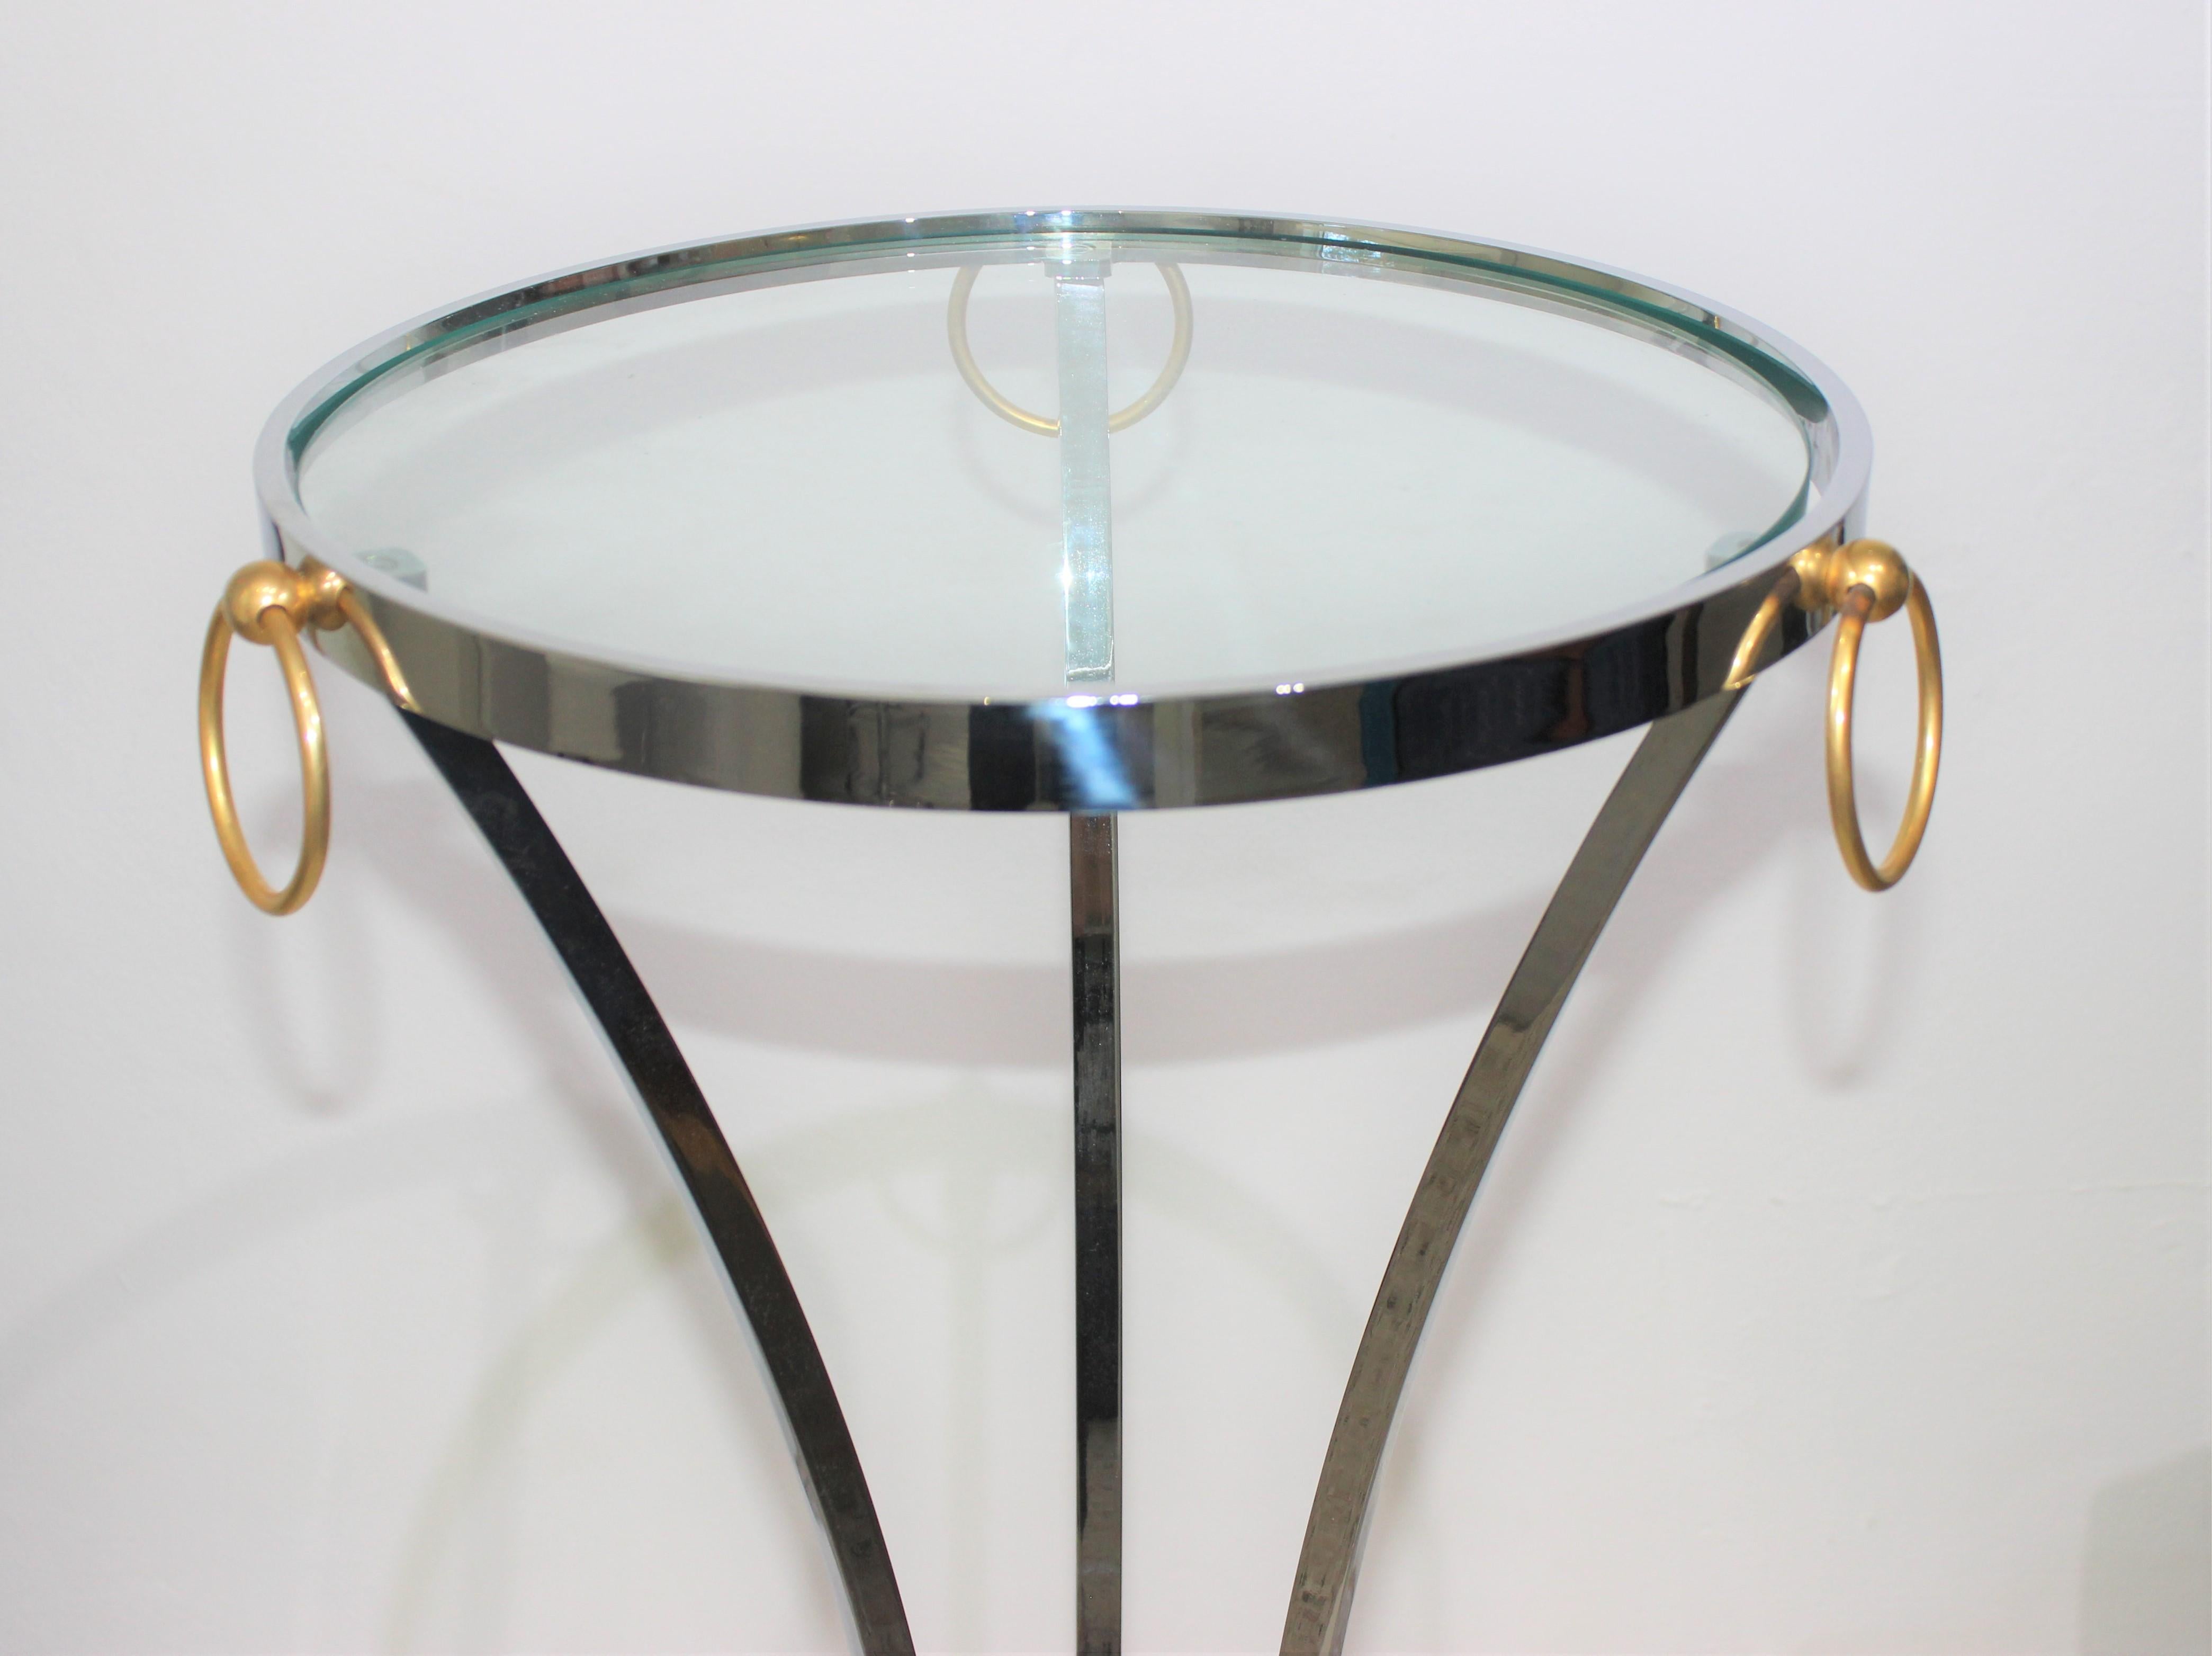 This stylish 1970s polished brass and chrome pedestal is very much in the style of pieces created by Maison Jansen.

Note: Diameter including the rings is approximately 17